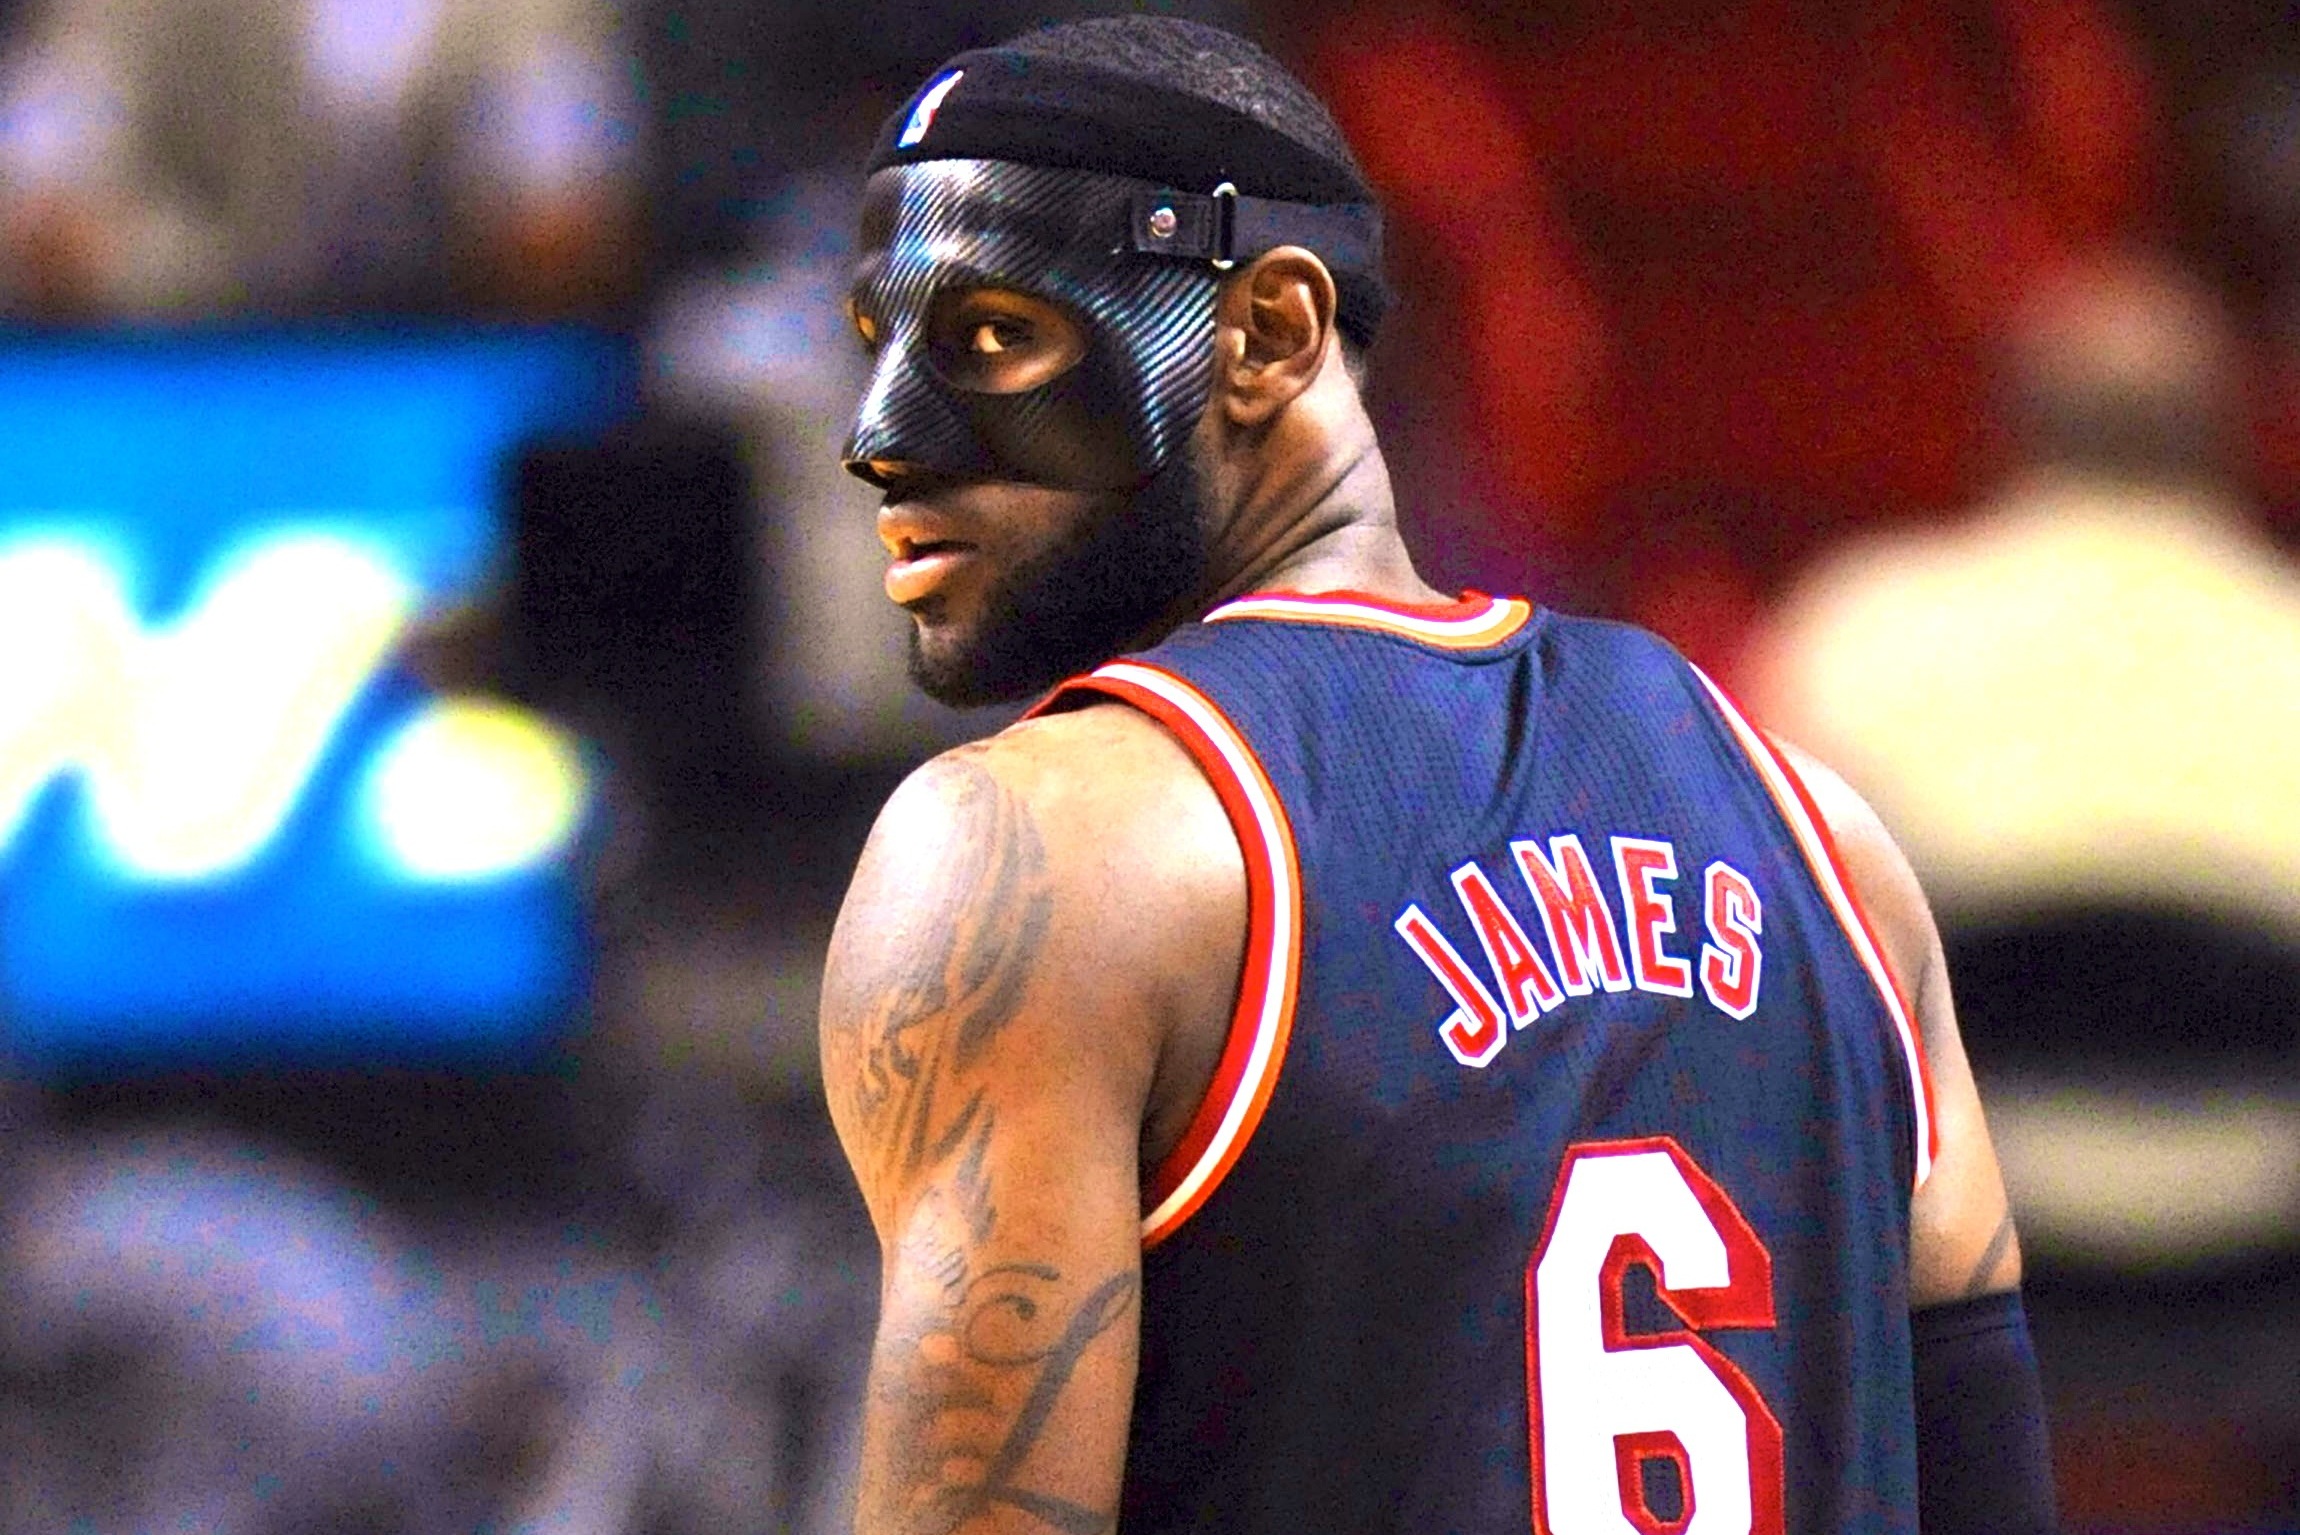 Miami Heat star LeBron James debuts black protective mask against Knicks –  New York Daily News